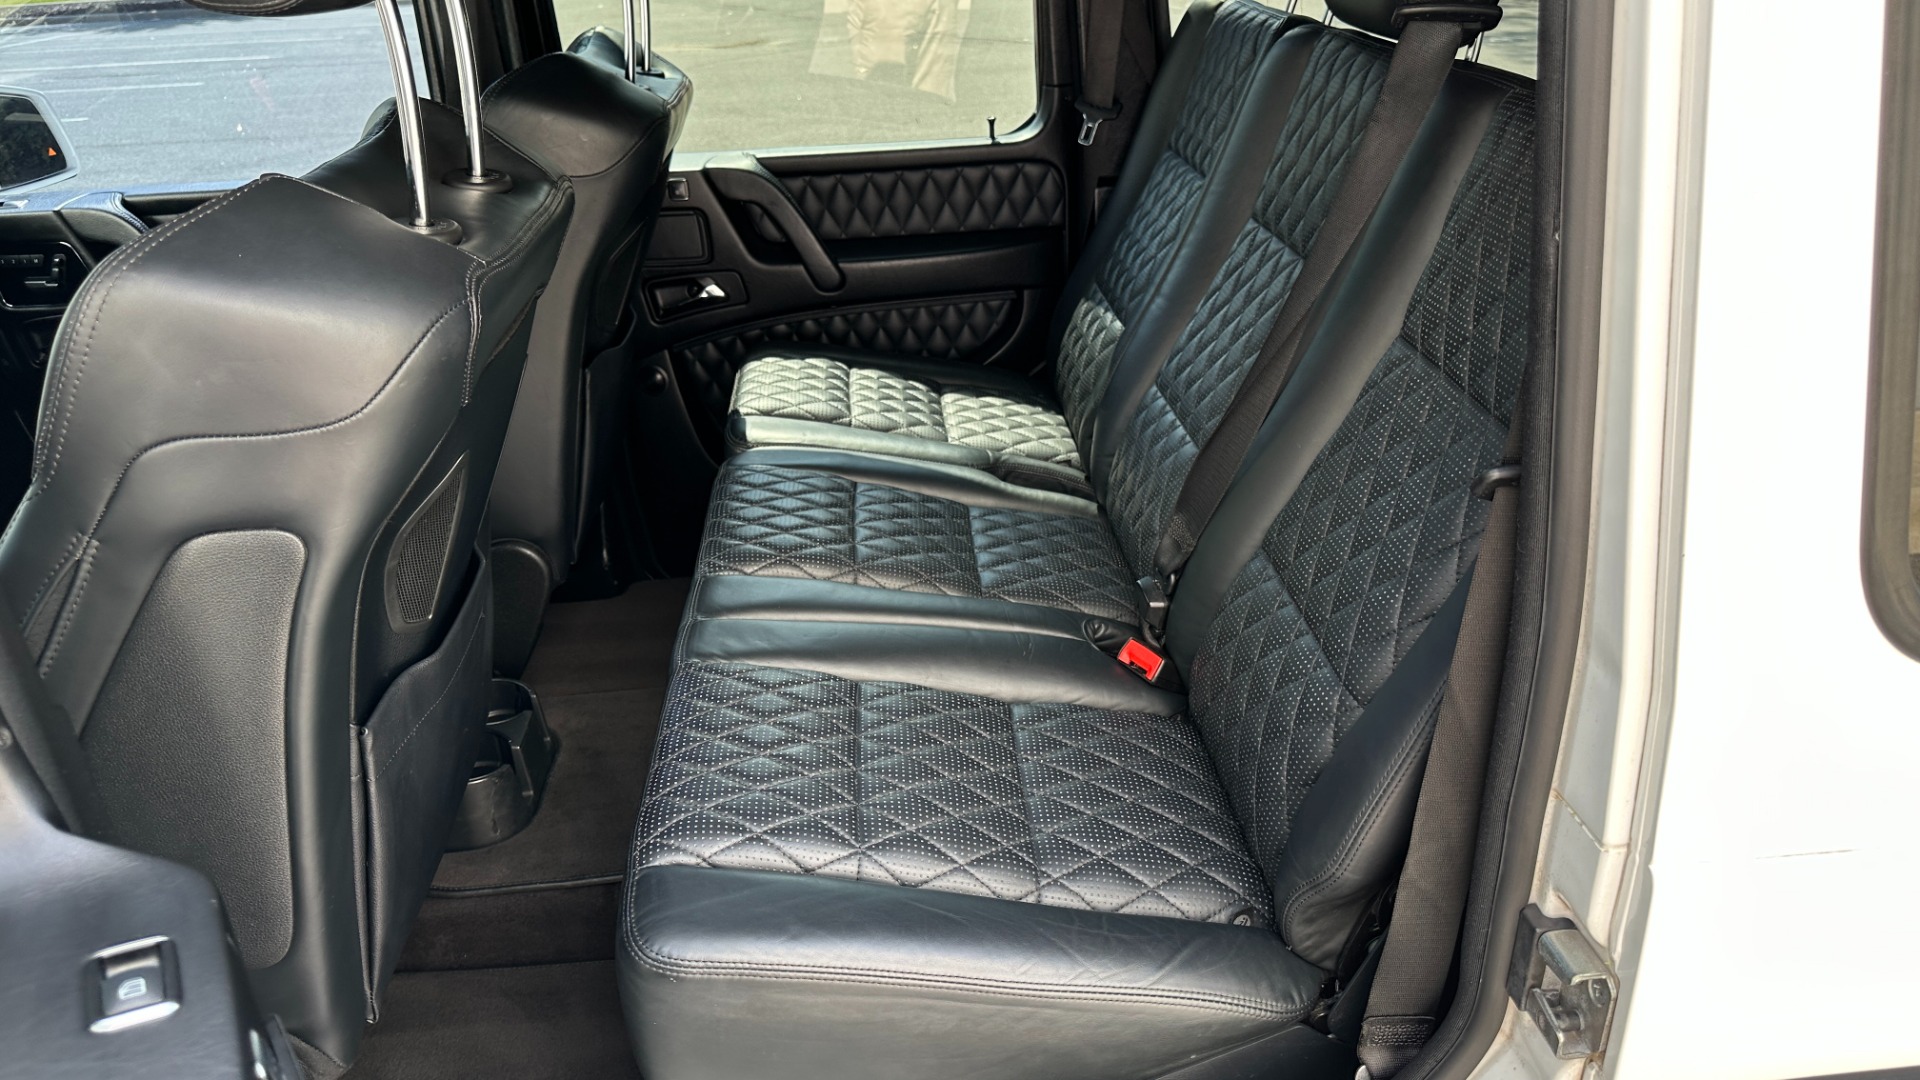 Used 2014 Mercedes-Benz G-Class G 63 AMG / DESIGNO LEATHER / DIAMOND STITCH / SPORTS SEATS / PA6 PKG for sale $67,995 at Formula Imports in Charlotte NC 28227 23